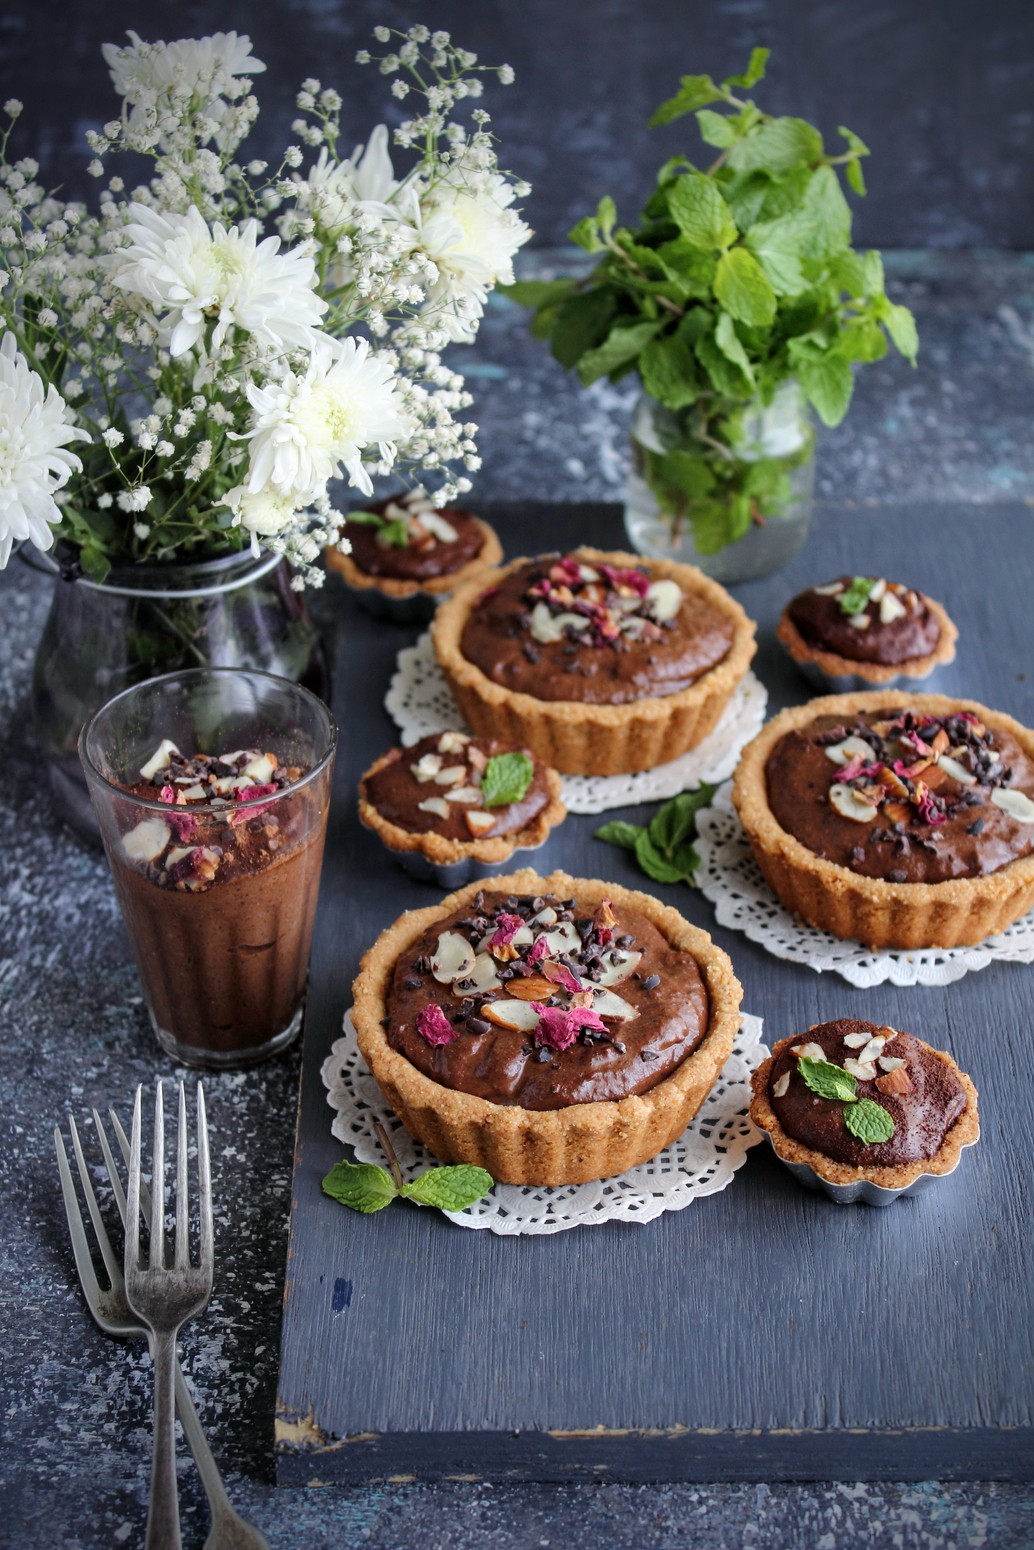 CHOCOLATE CHIA MOUSSE TARTLETS